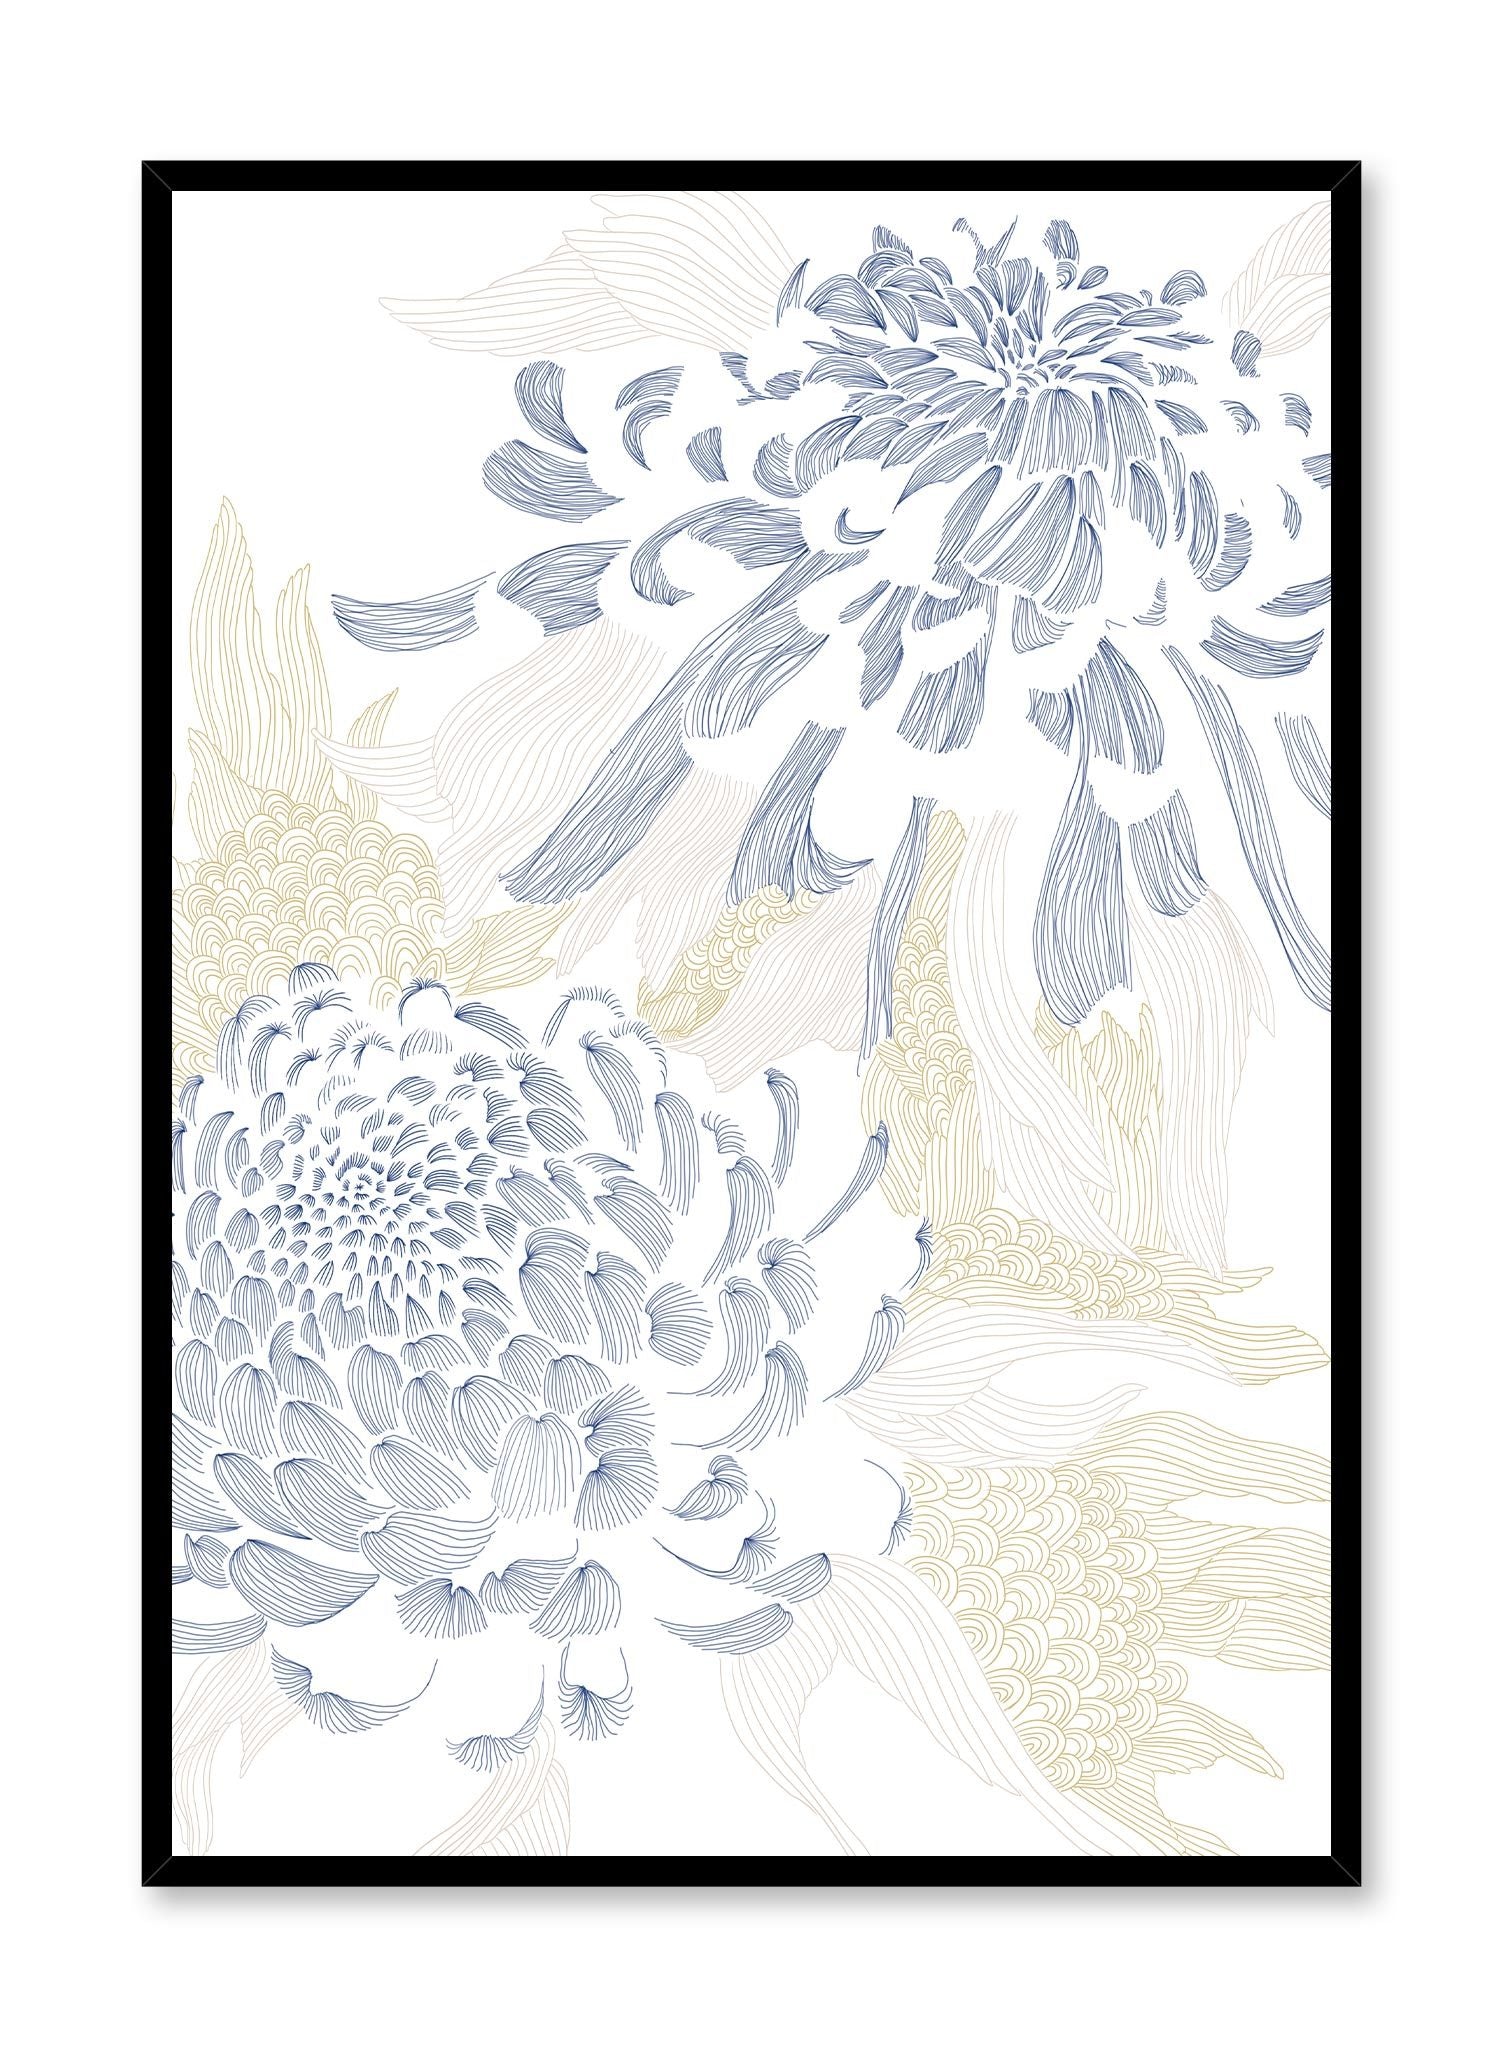 Hanakotoba is a minimalist illustration by Opposite Wall of big blooming blue and beige flowers.